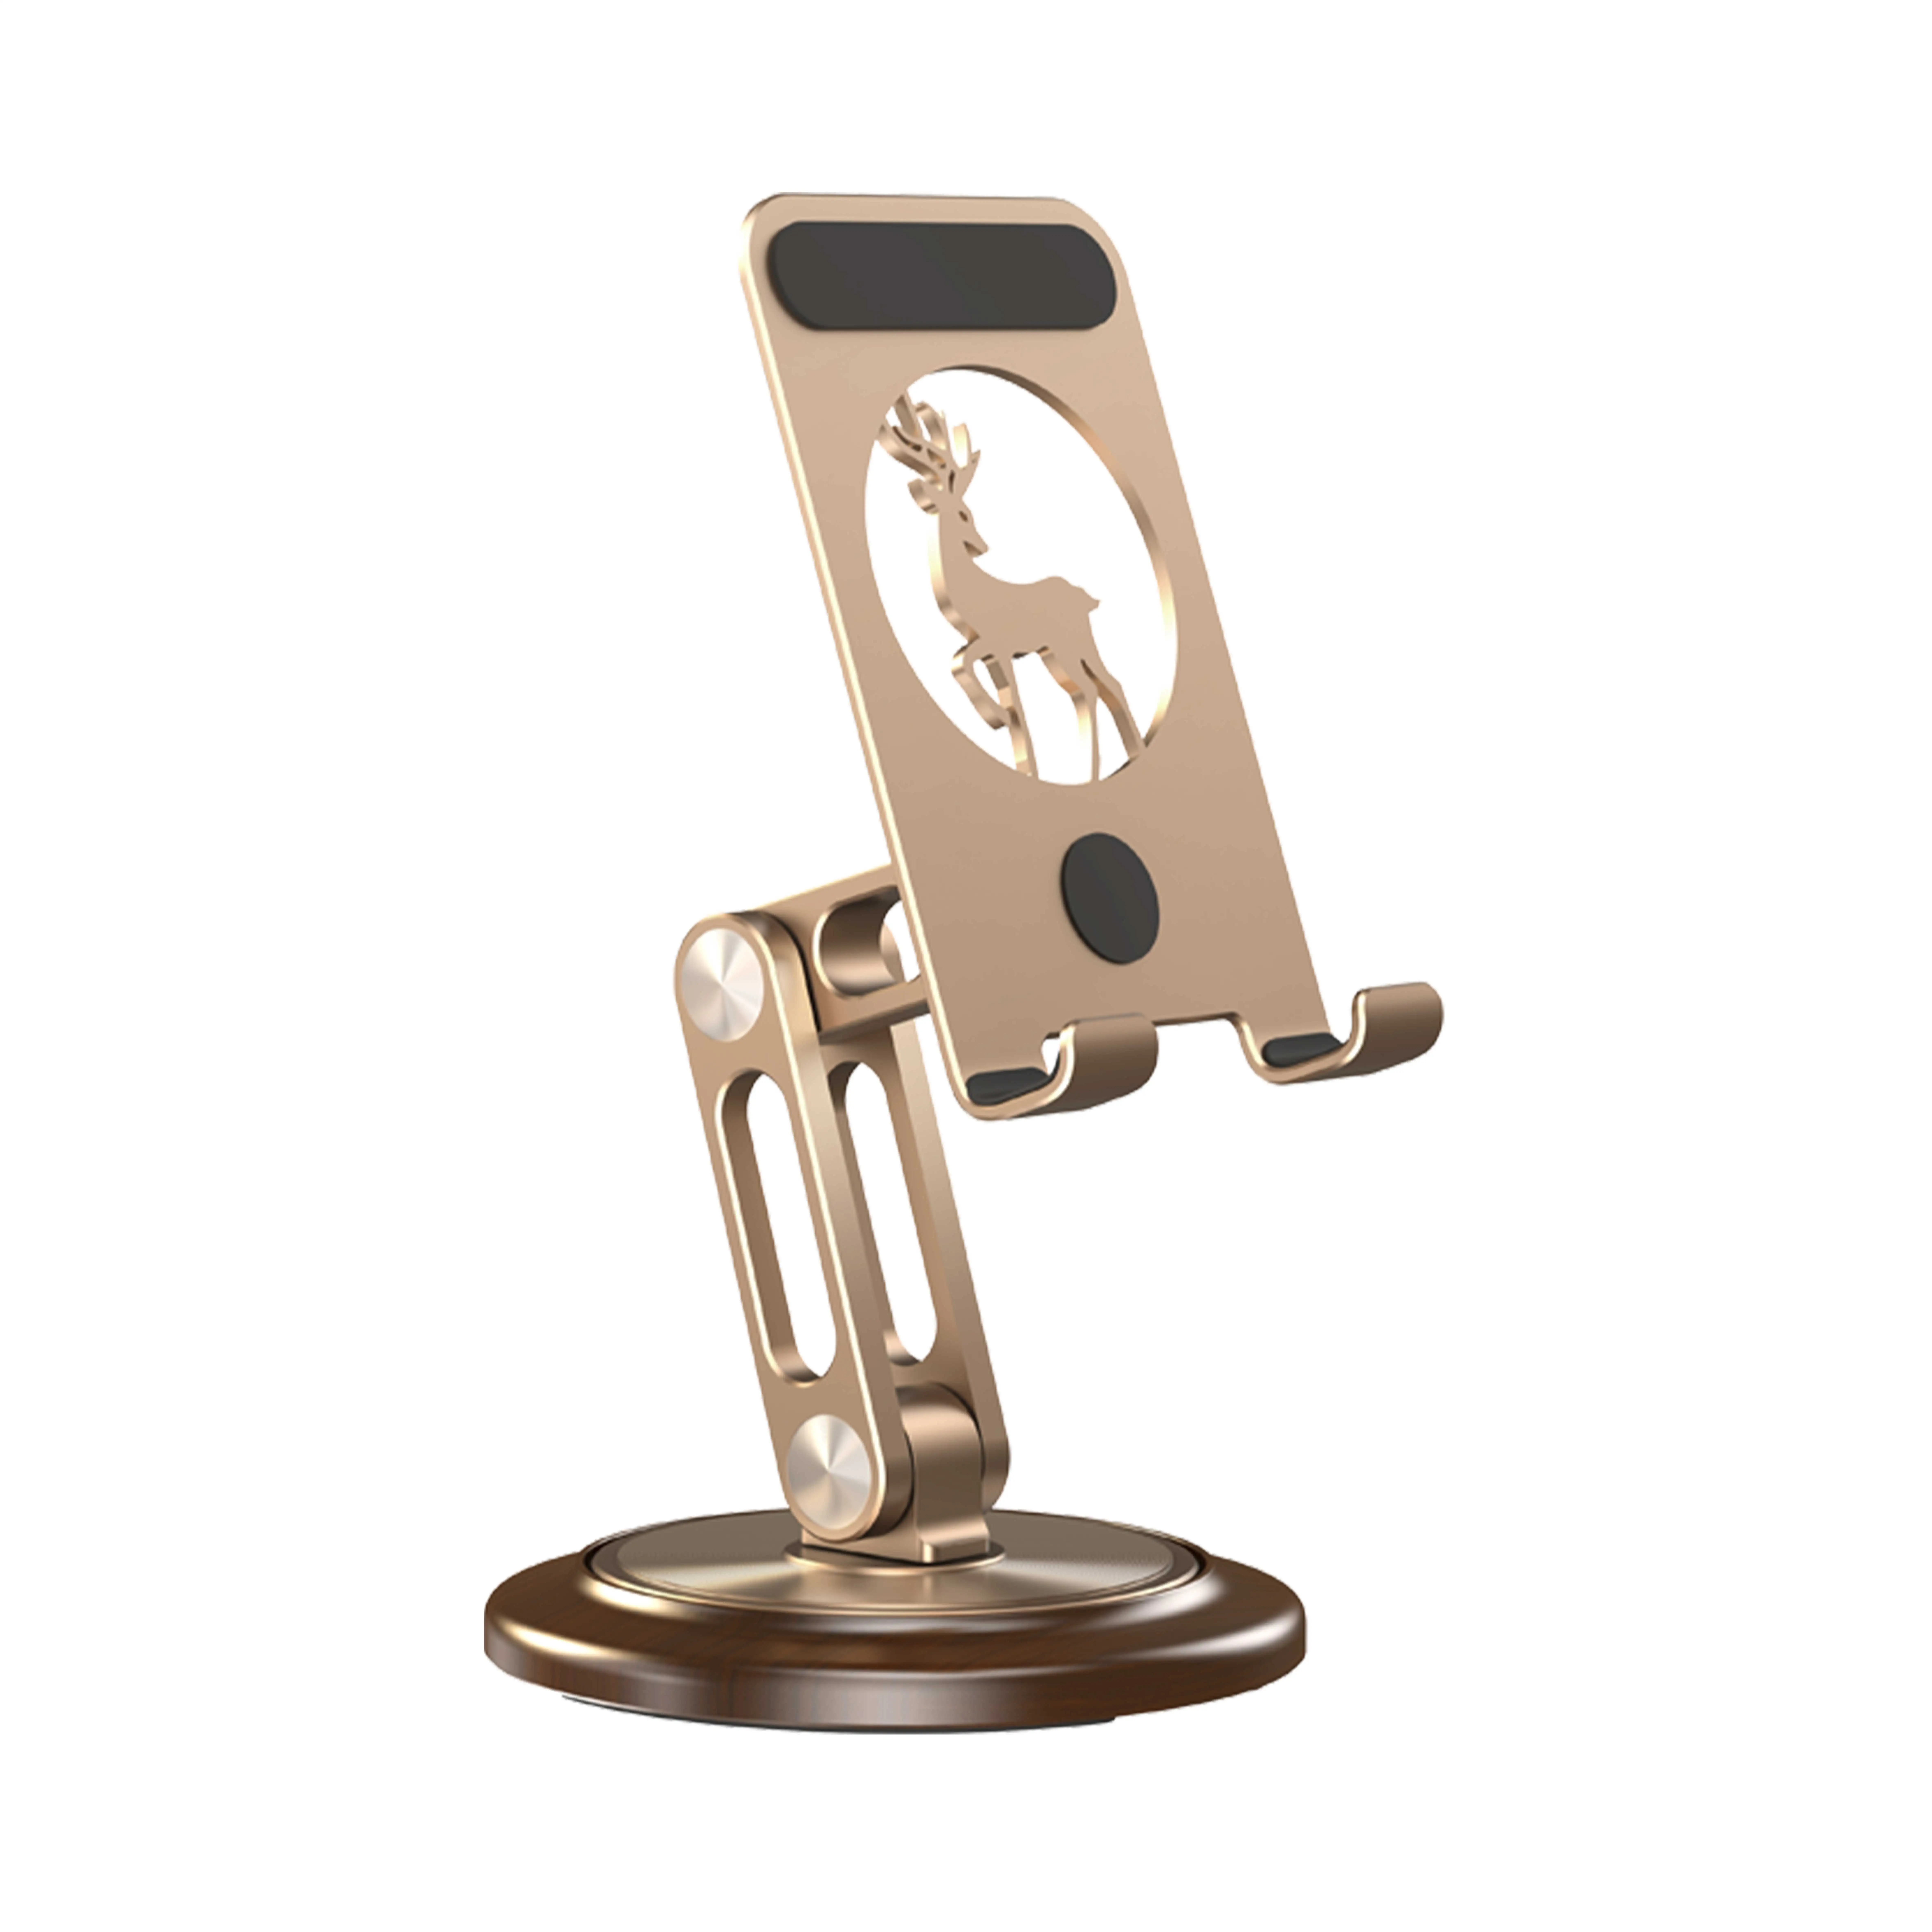 

Boneruy L69G Colorful Desktop Double Arms Swivel Cell Phone Holder Angle Adjustable Aluminum Alloy Mobile Phone Stand